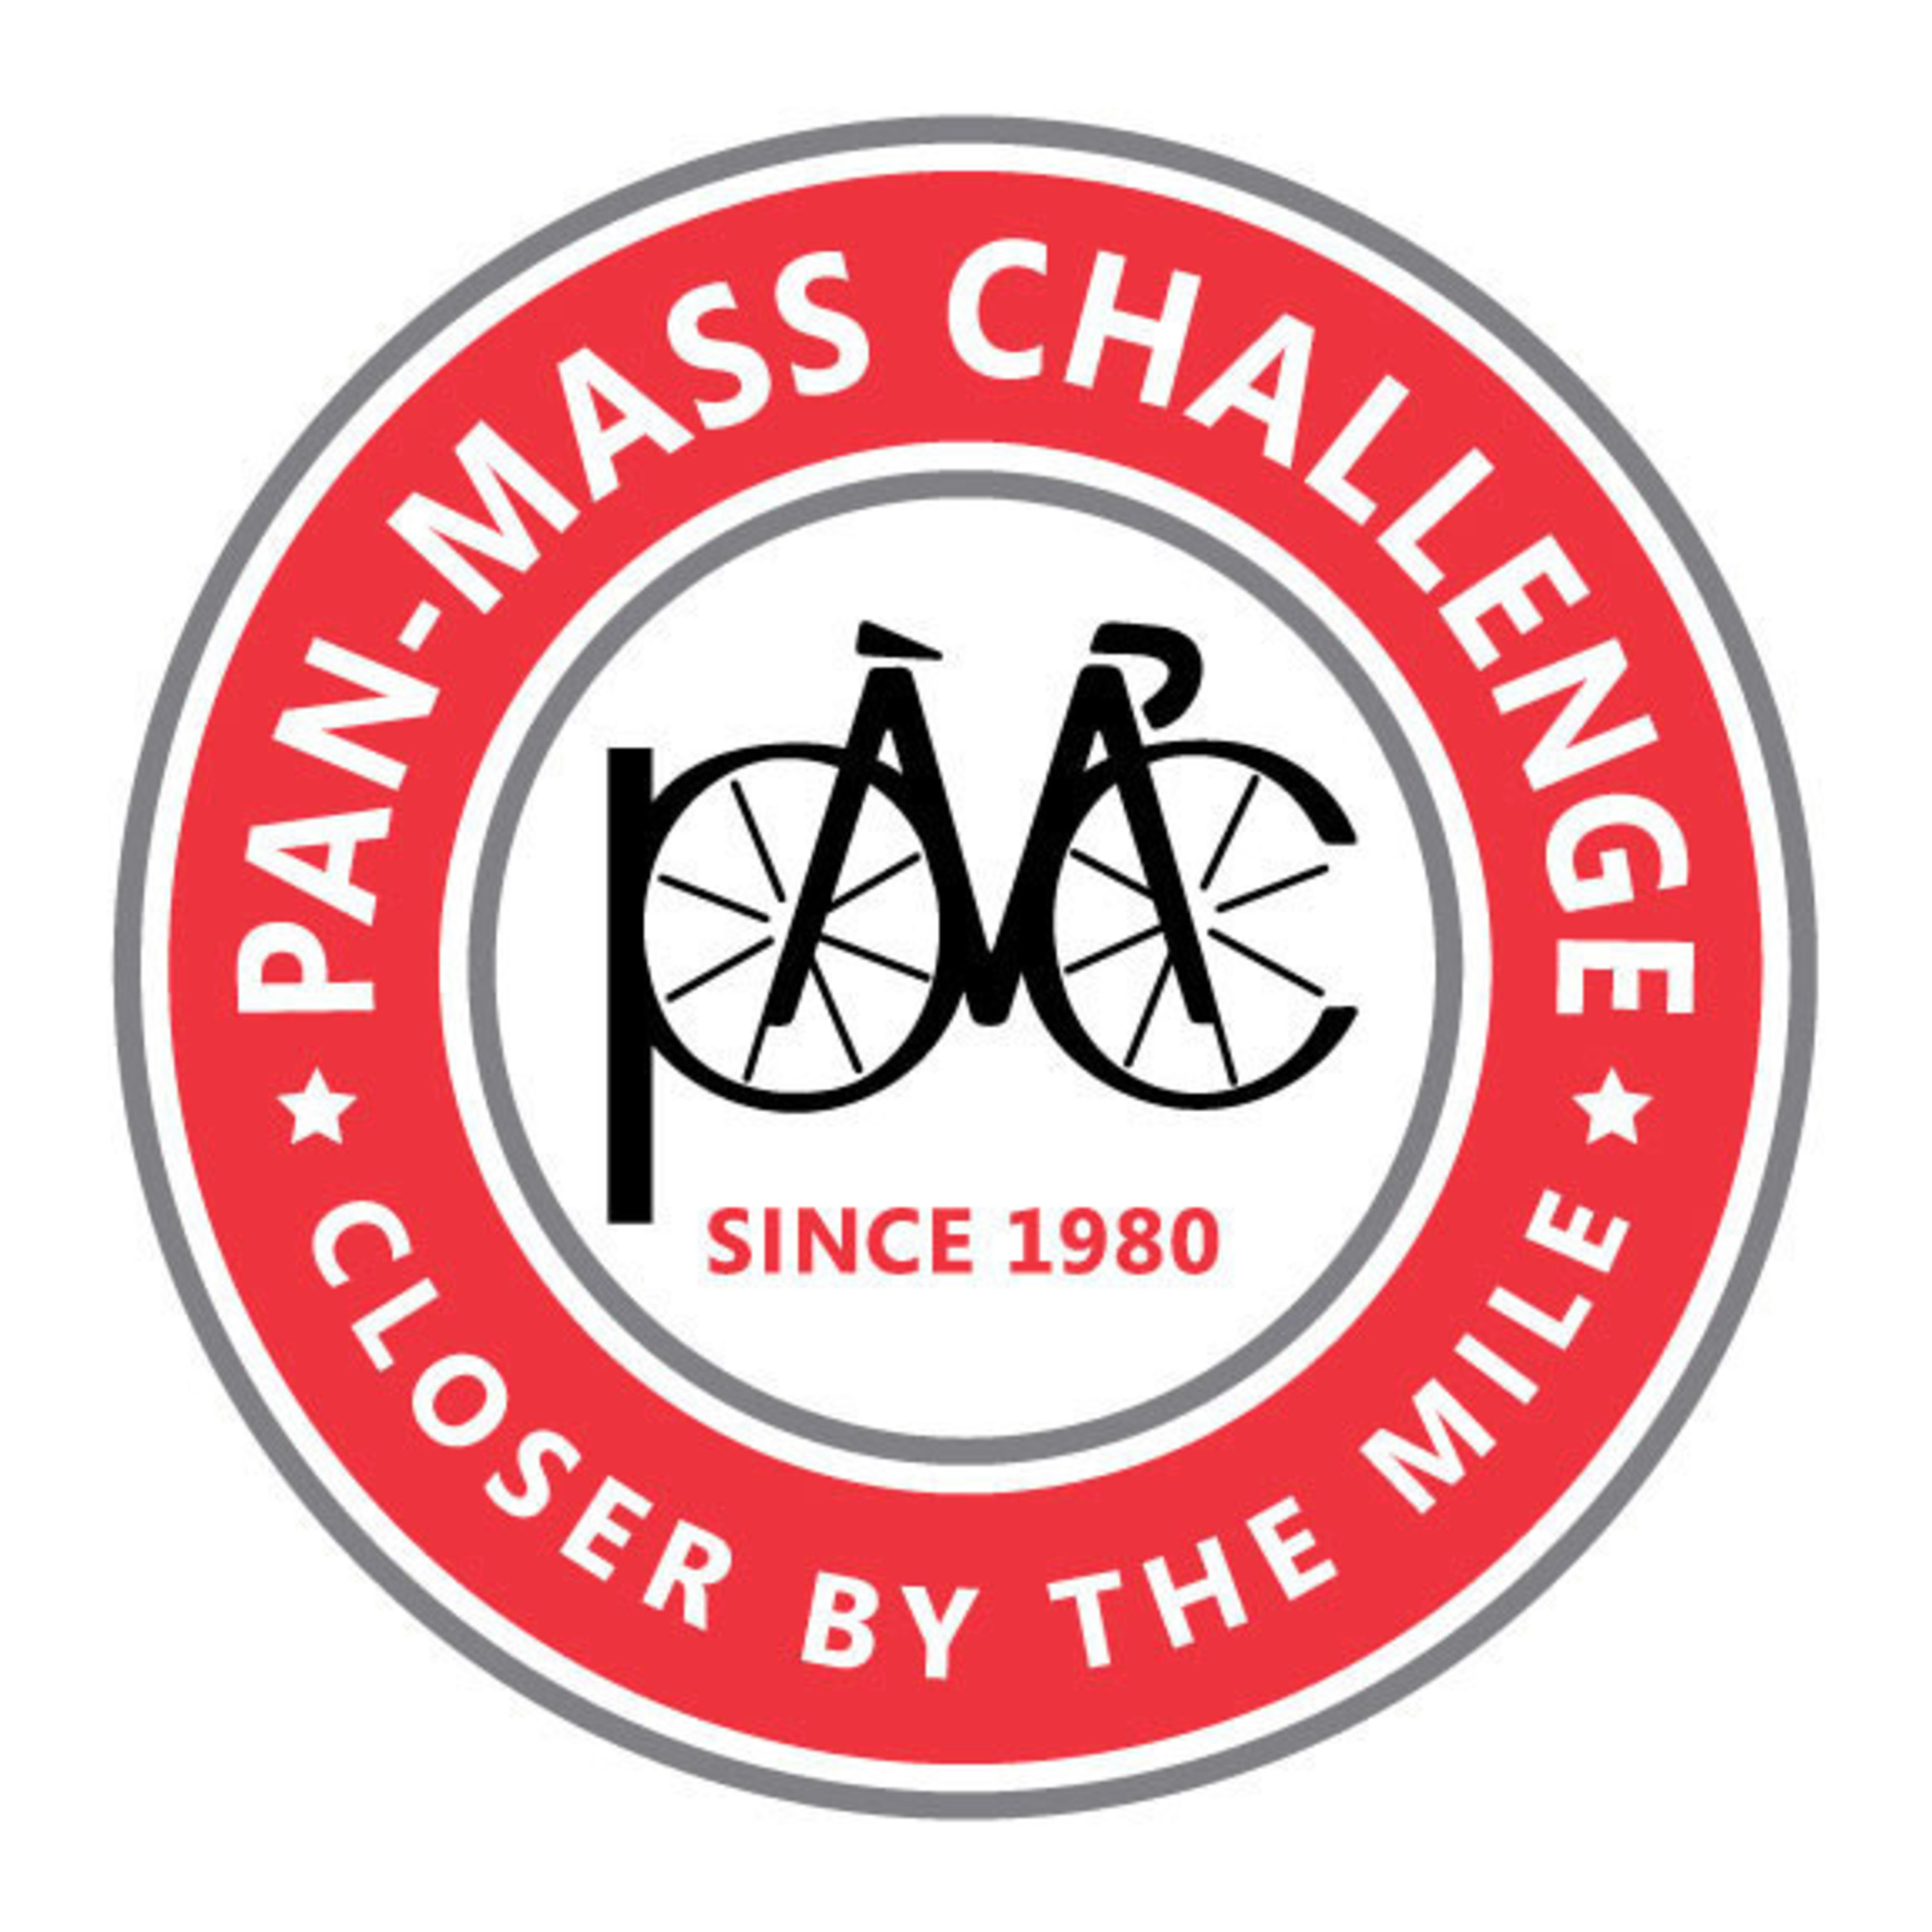 Pan-Mass Challenge announces record-setting gift to Dana-Farber Cancer Institute, bringing the 35 year total to $455 million